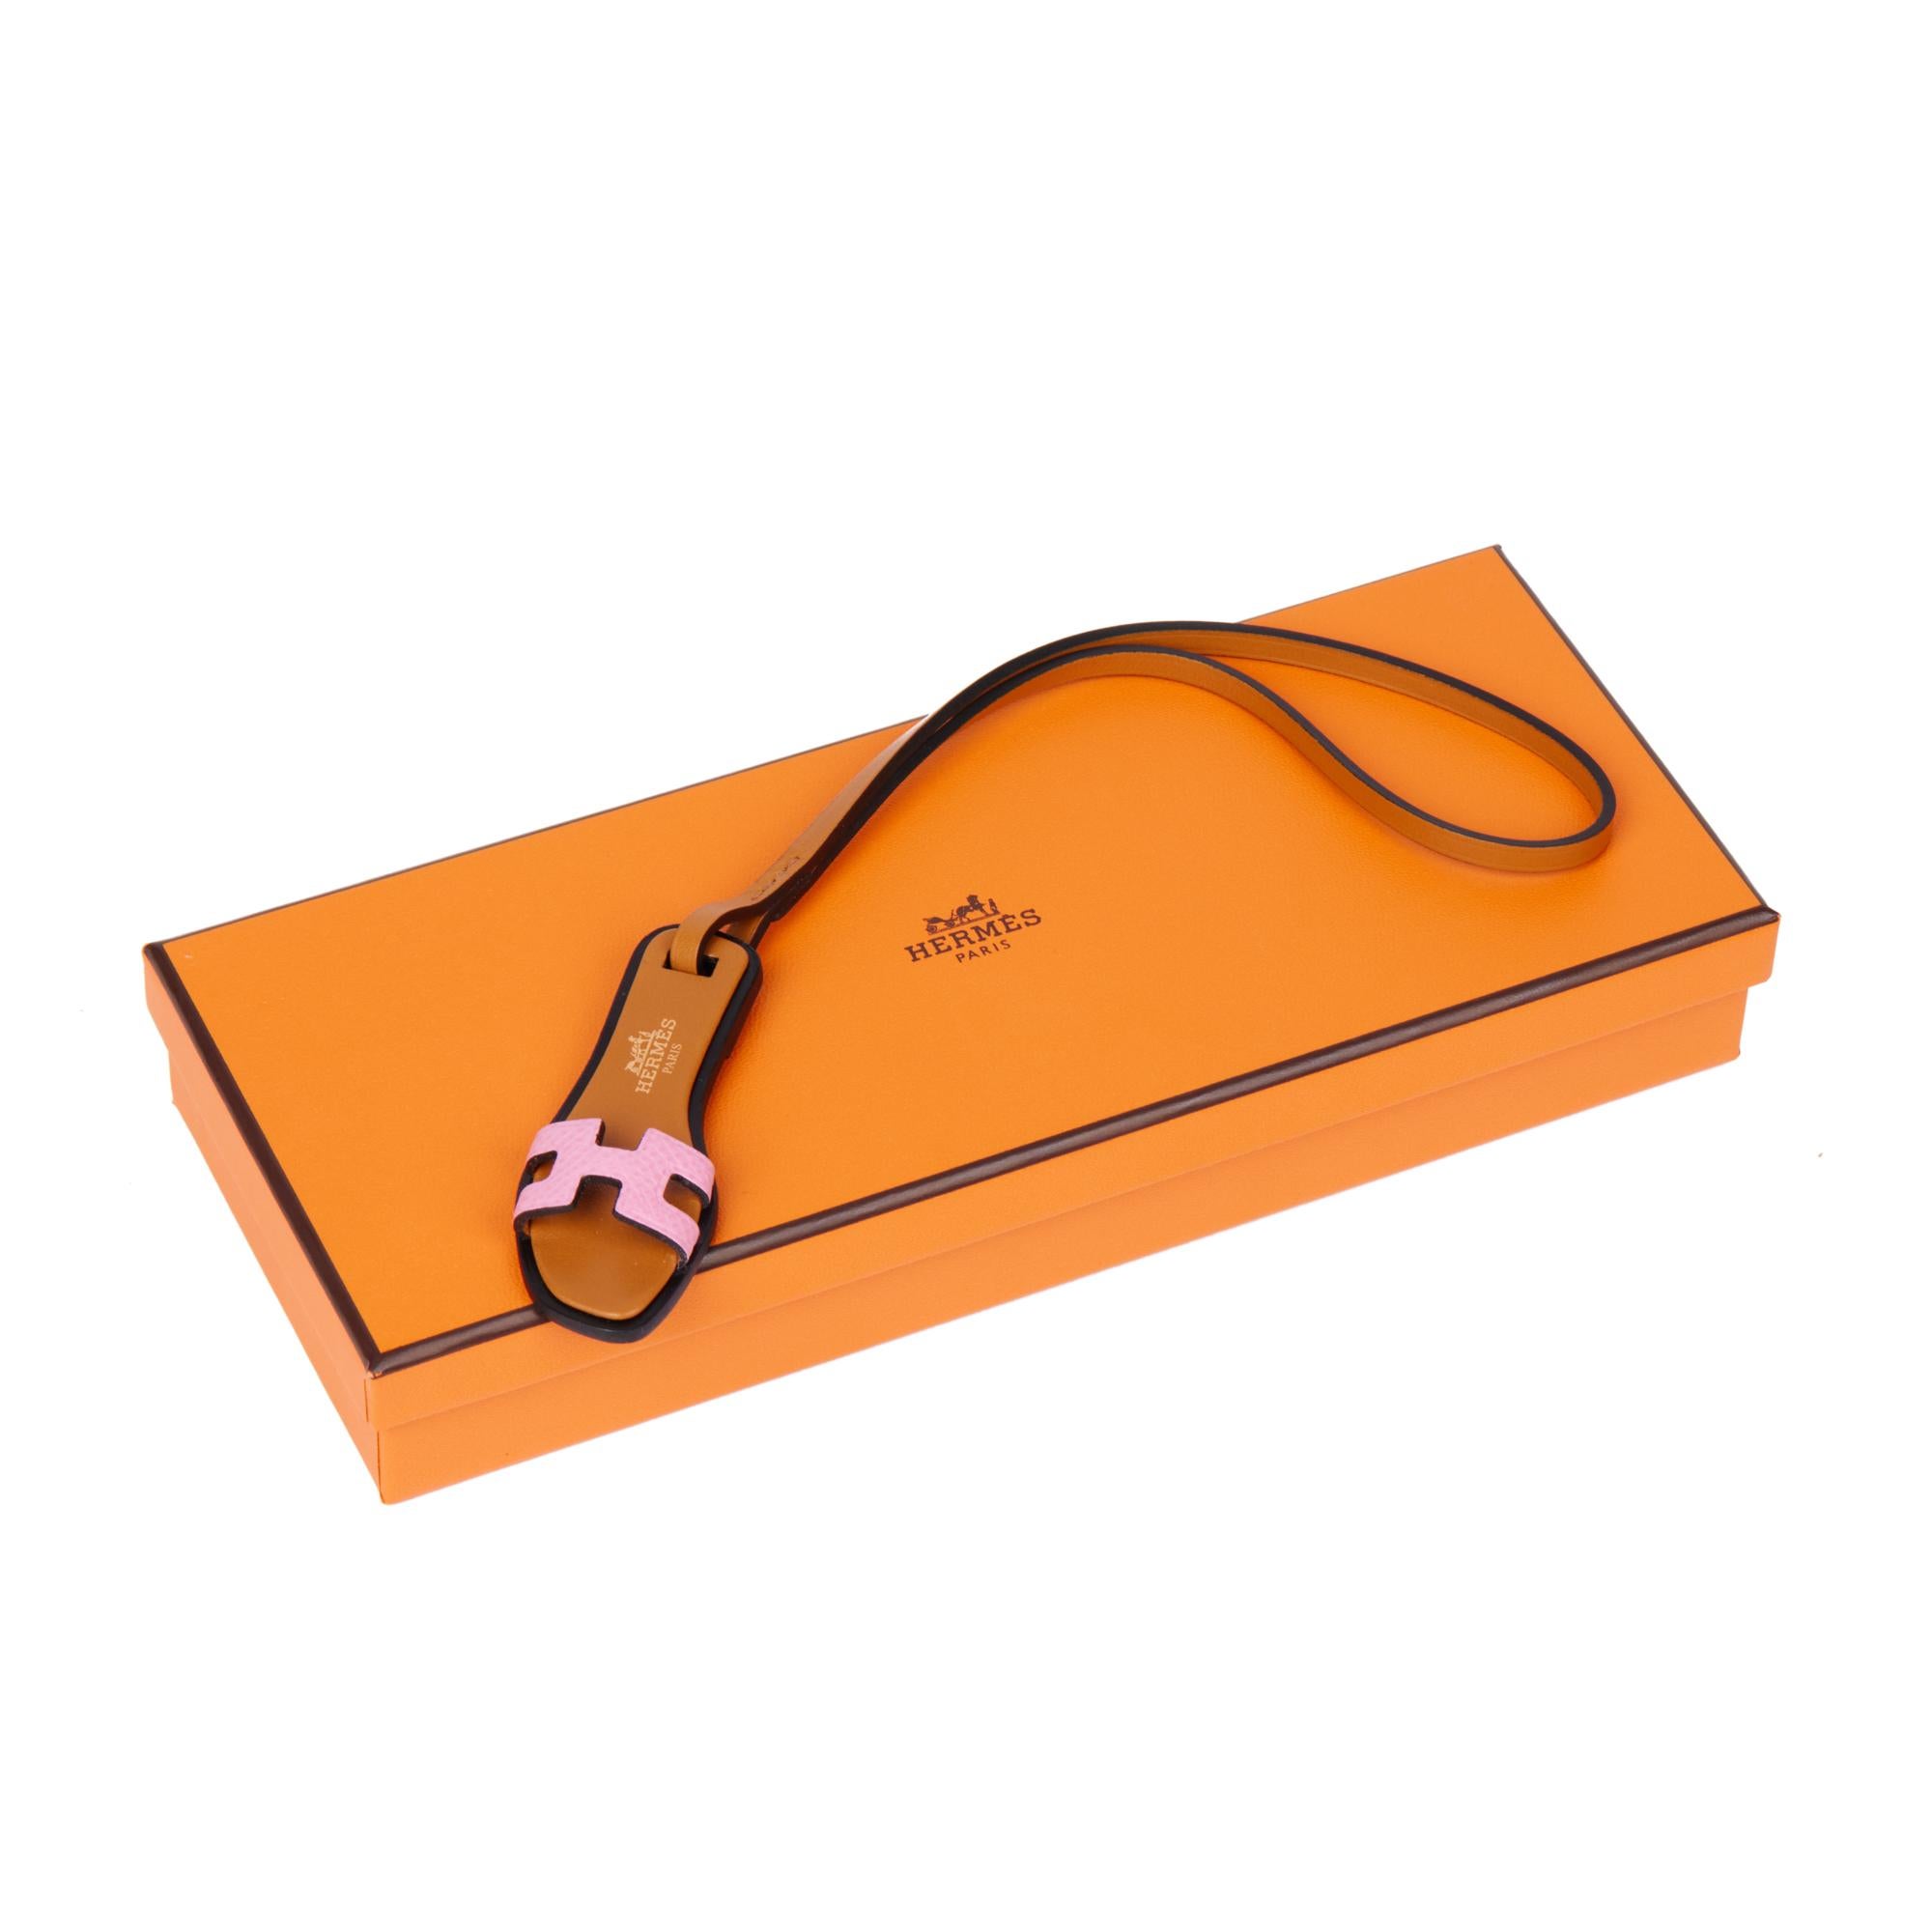 Hermès ROSE CONFETTI EPSOM LEATHER & NATURAL SABLE LEATHER ORAN CHARM

CONDITION NOTES
This item is in unworn condition.

XUPES REFERENCE	AA0031
BRAND	Hermès
MODEL	Oran Charm
AGE	2022
GENDER	Women's
MATERIAL(S)	Epsom Leather, Natural